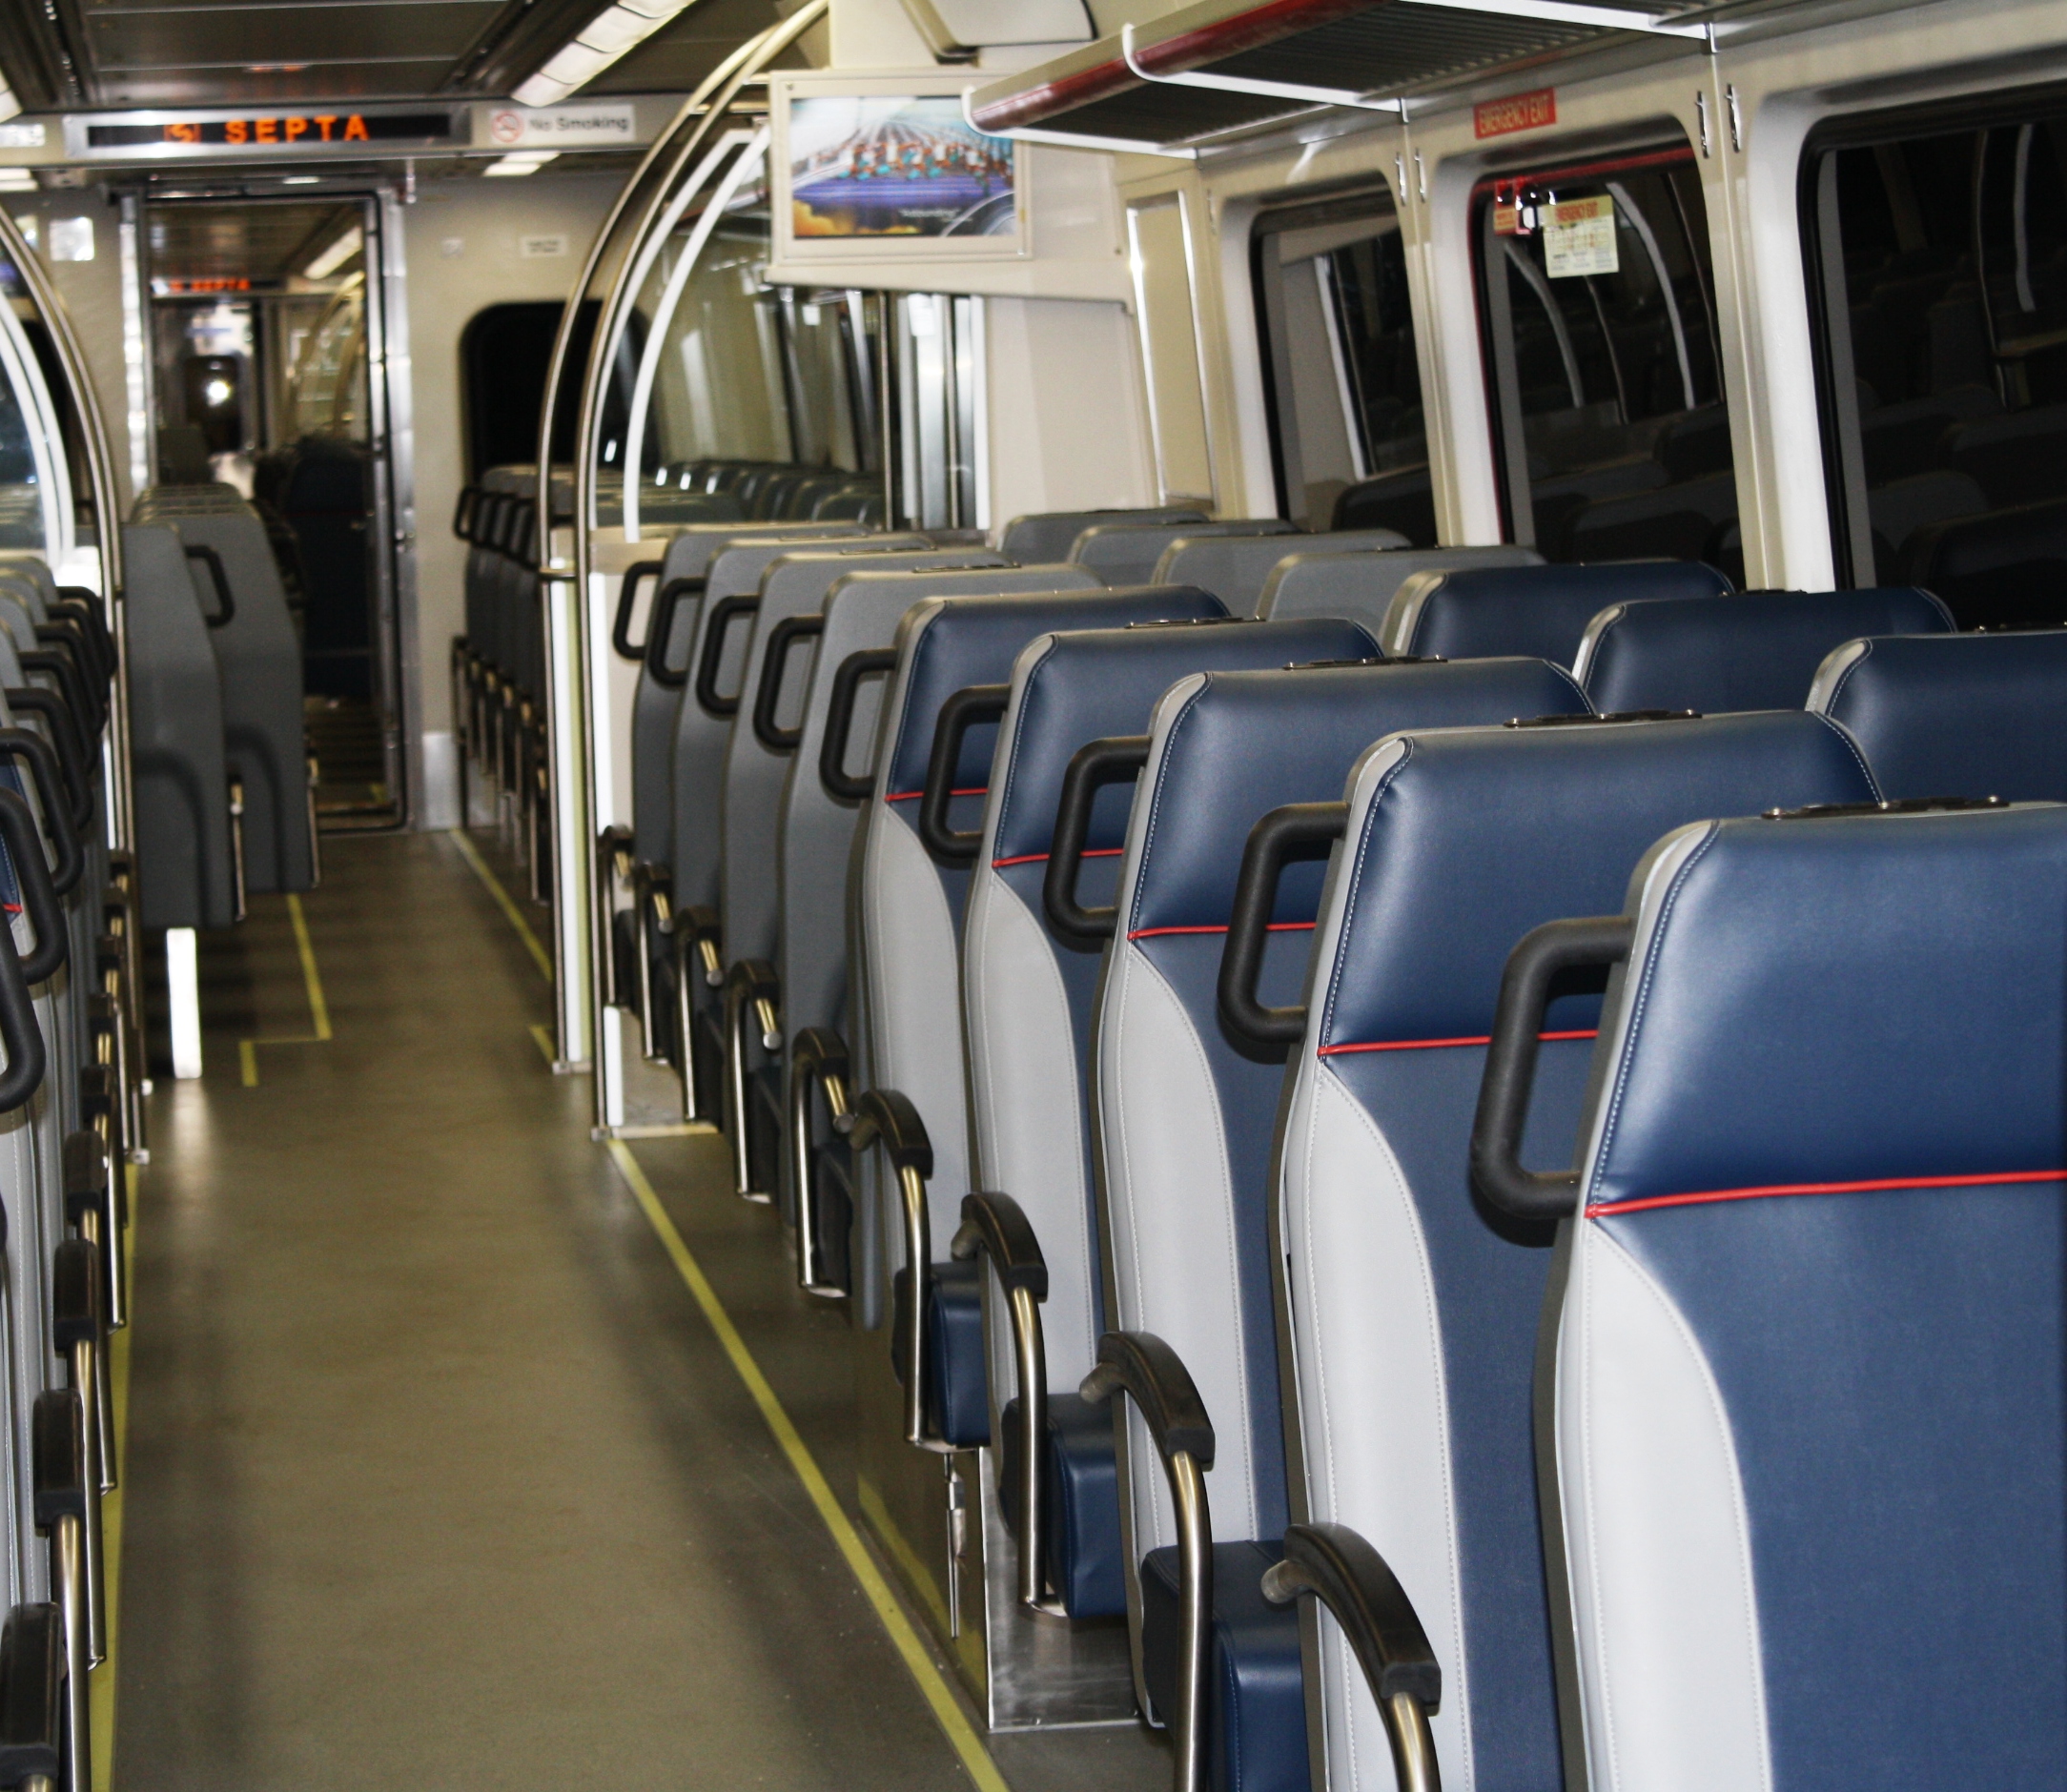 The Silverliner Vs have 109 seats, 11 fewer than the Silverliner IVs, which had 120 seats. Photo courtesy of SEPTA